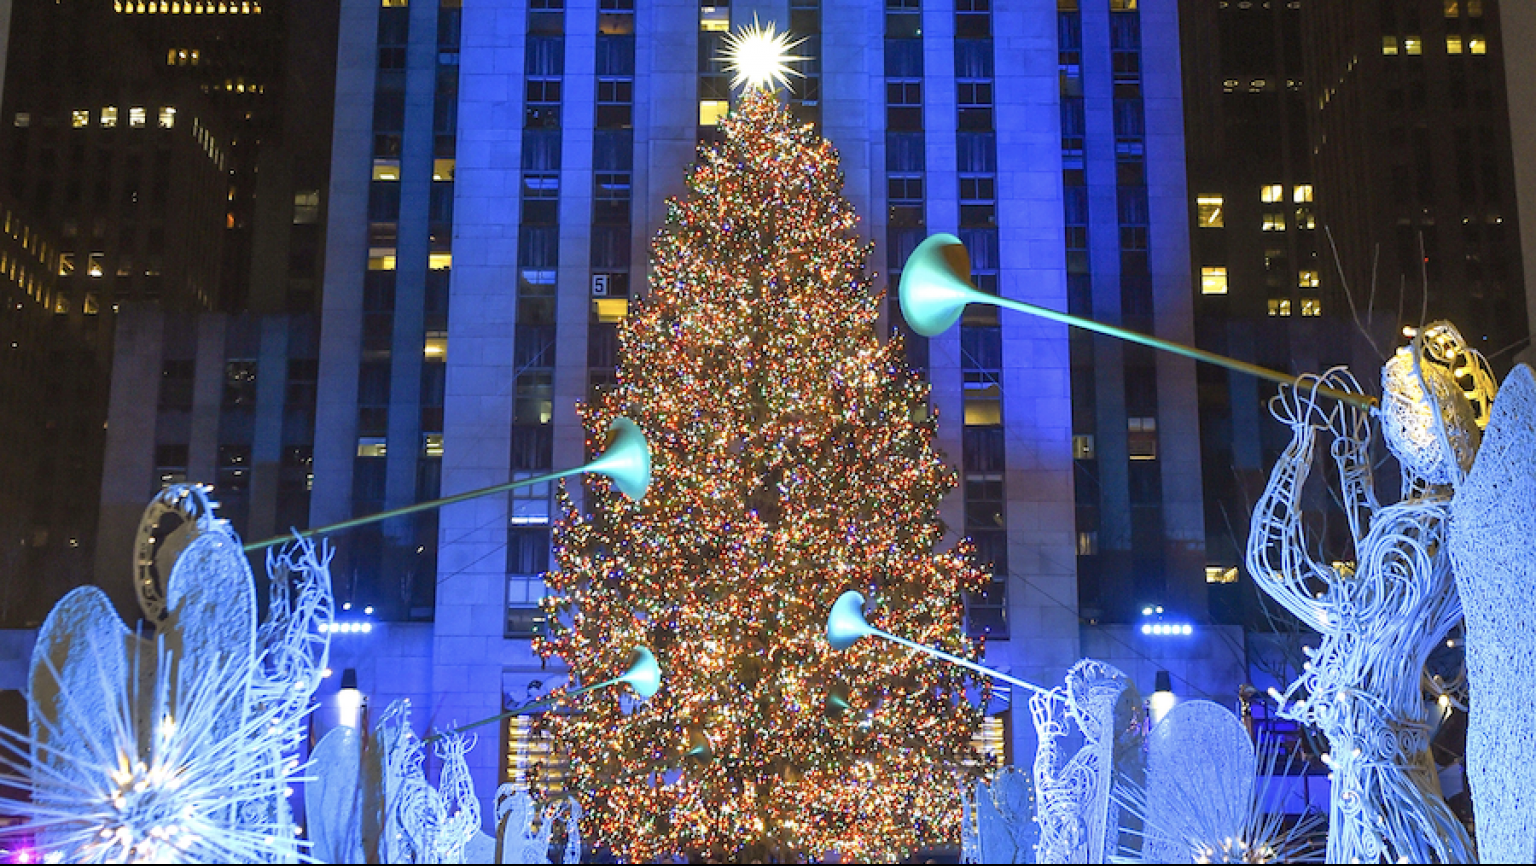 Rockefeller center tree lighting 2021 performers come from away